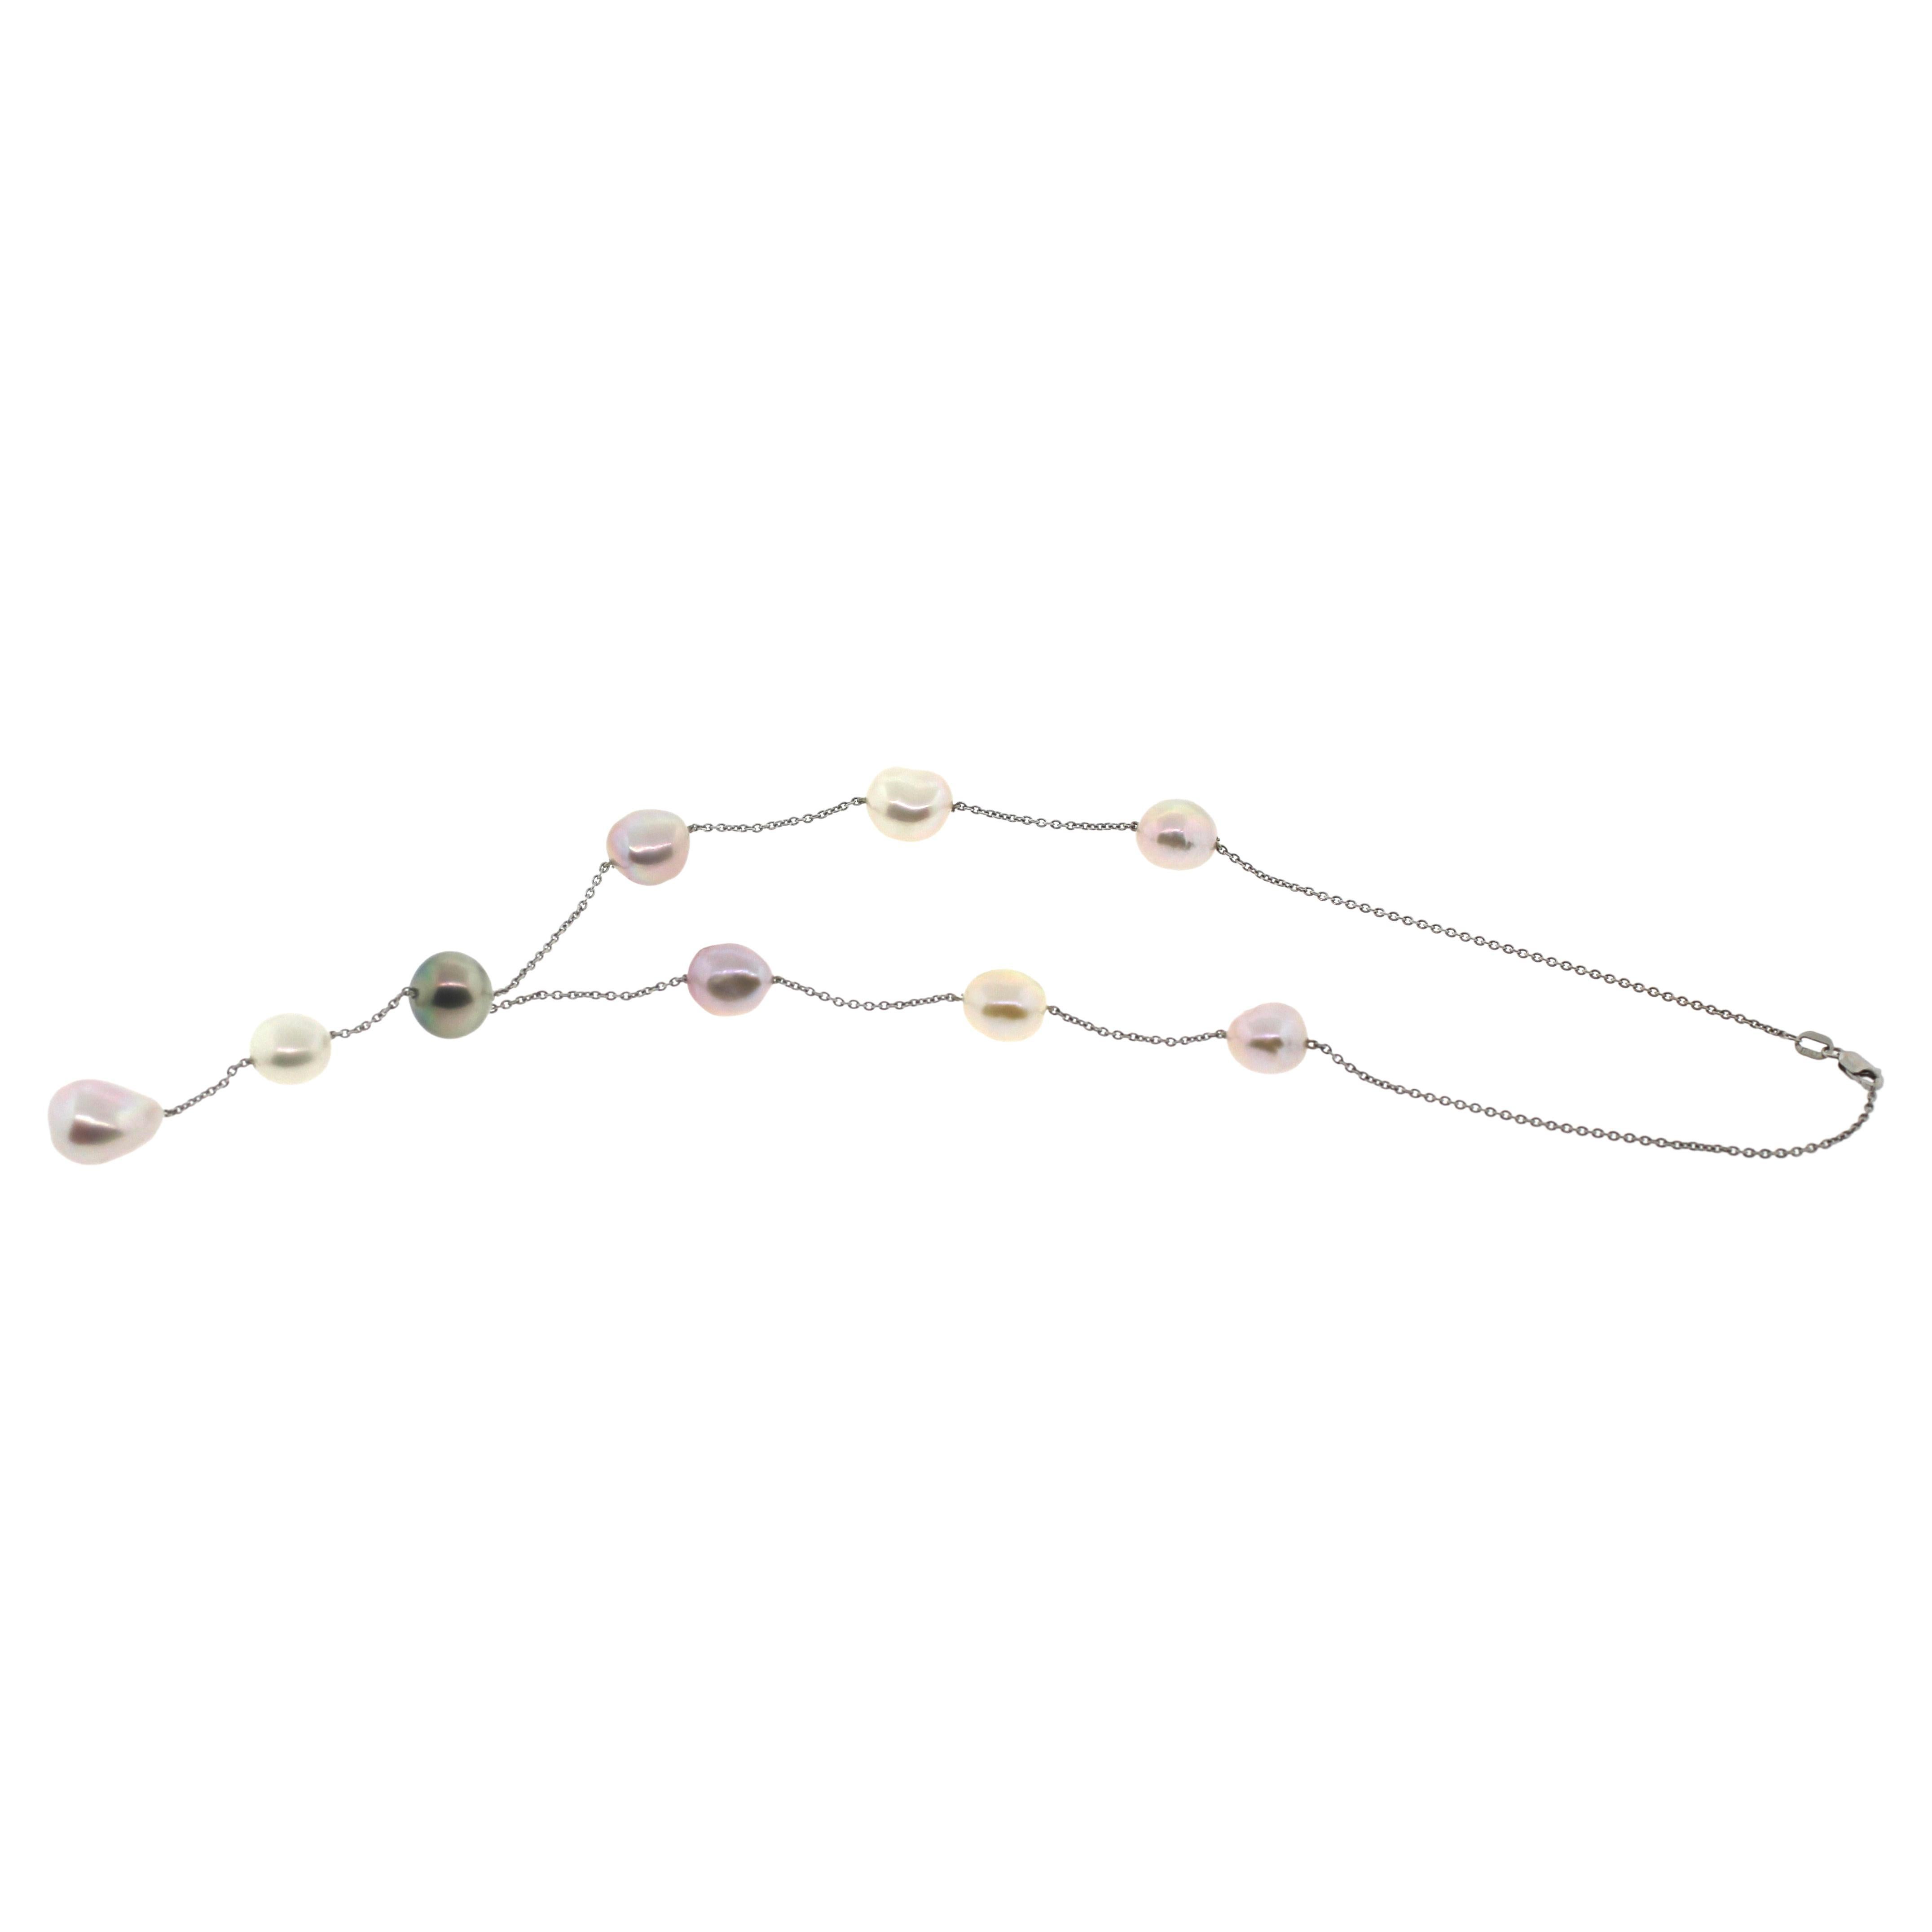 Hakimoto By Jewel Of Ocean Pearl Necklace
18K White Gold Chain With Tahiti and 8 Baroque Pearl
23.2 Grams
17